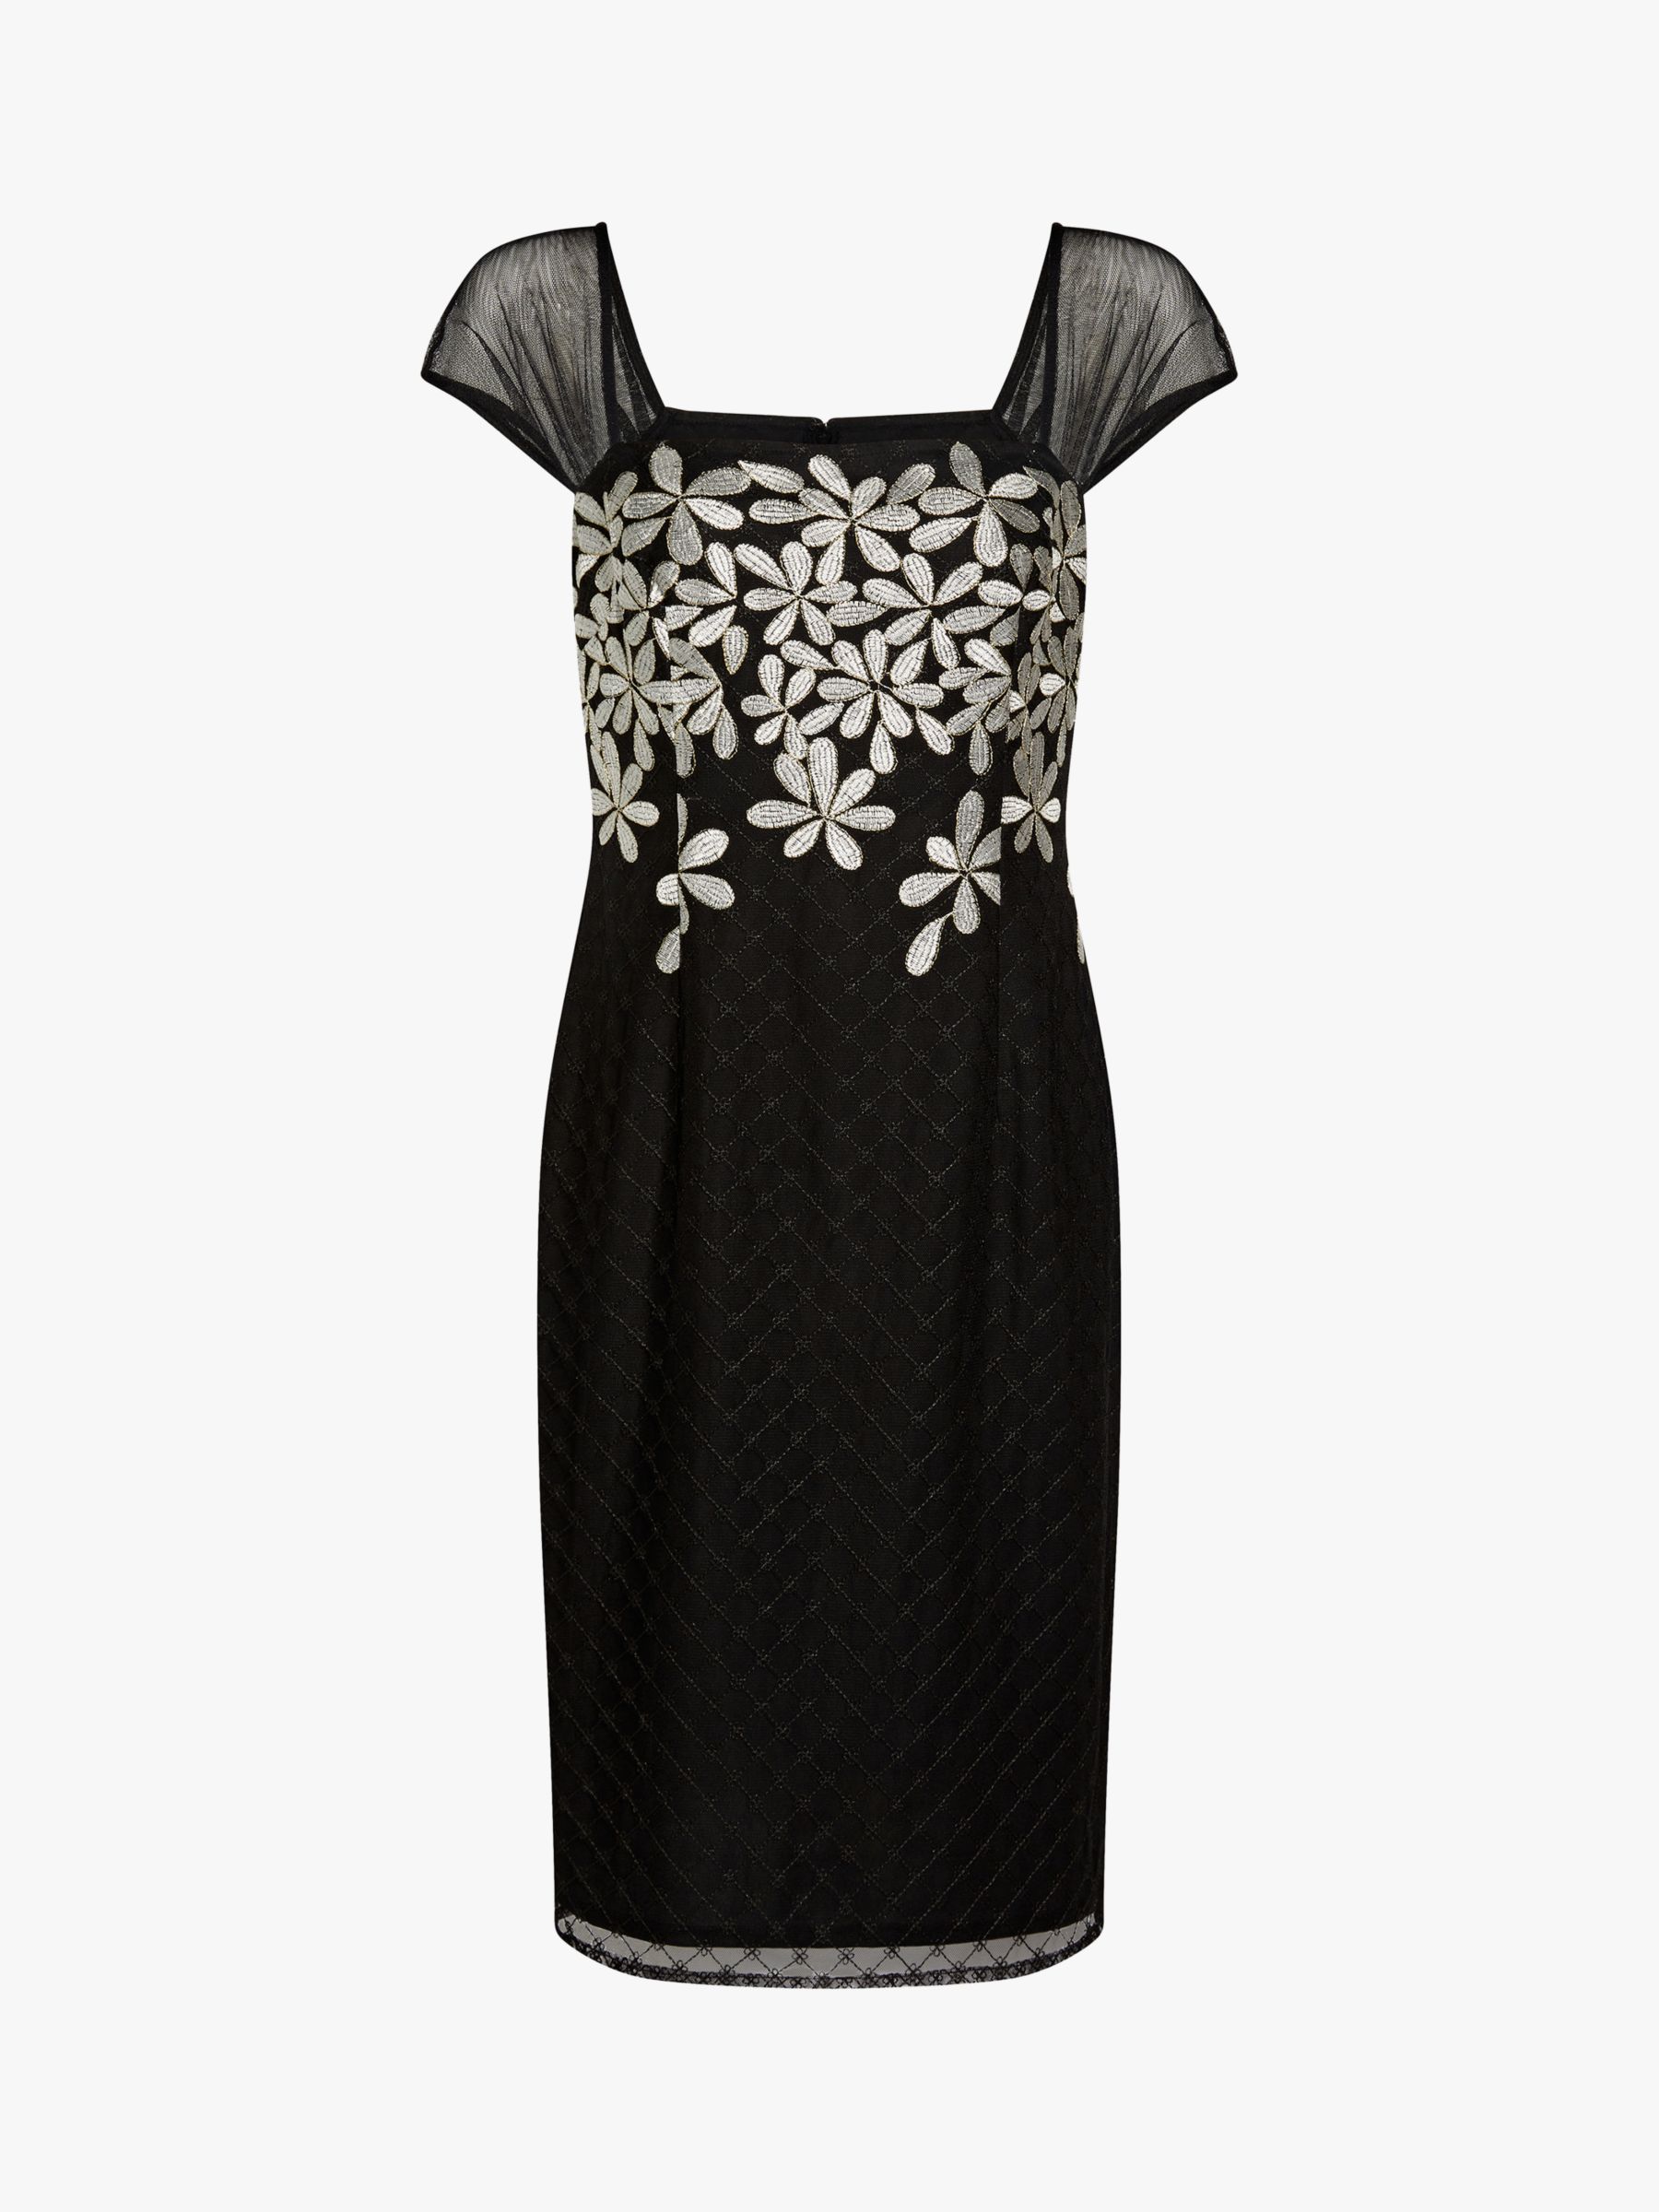 Adrianna Papell Floral Sheath Dress, Black/Ivory at John Lewis & Partners